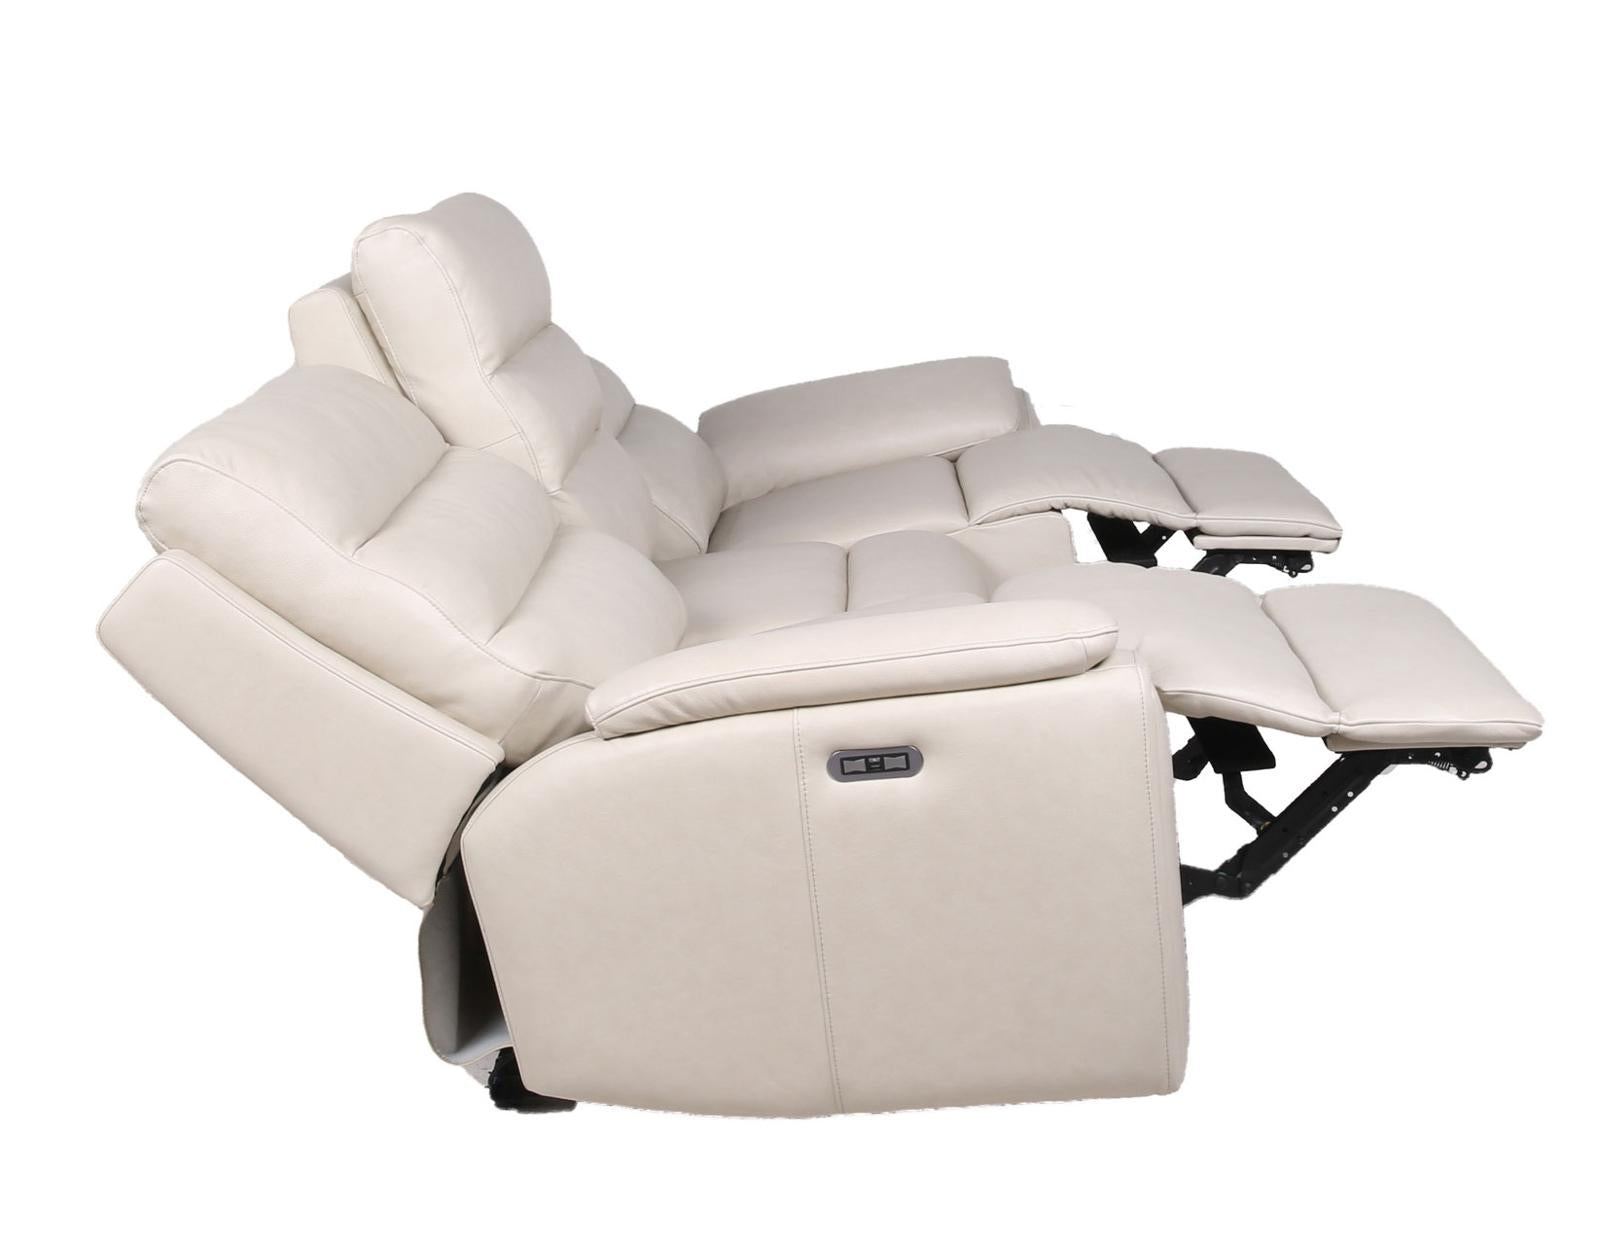 Steve Silver Duval Leather Dual Power Reclining Sofa in Impressive Ivory